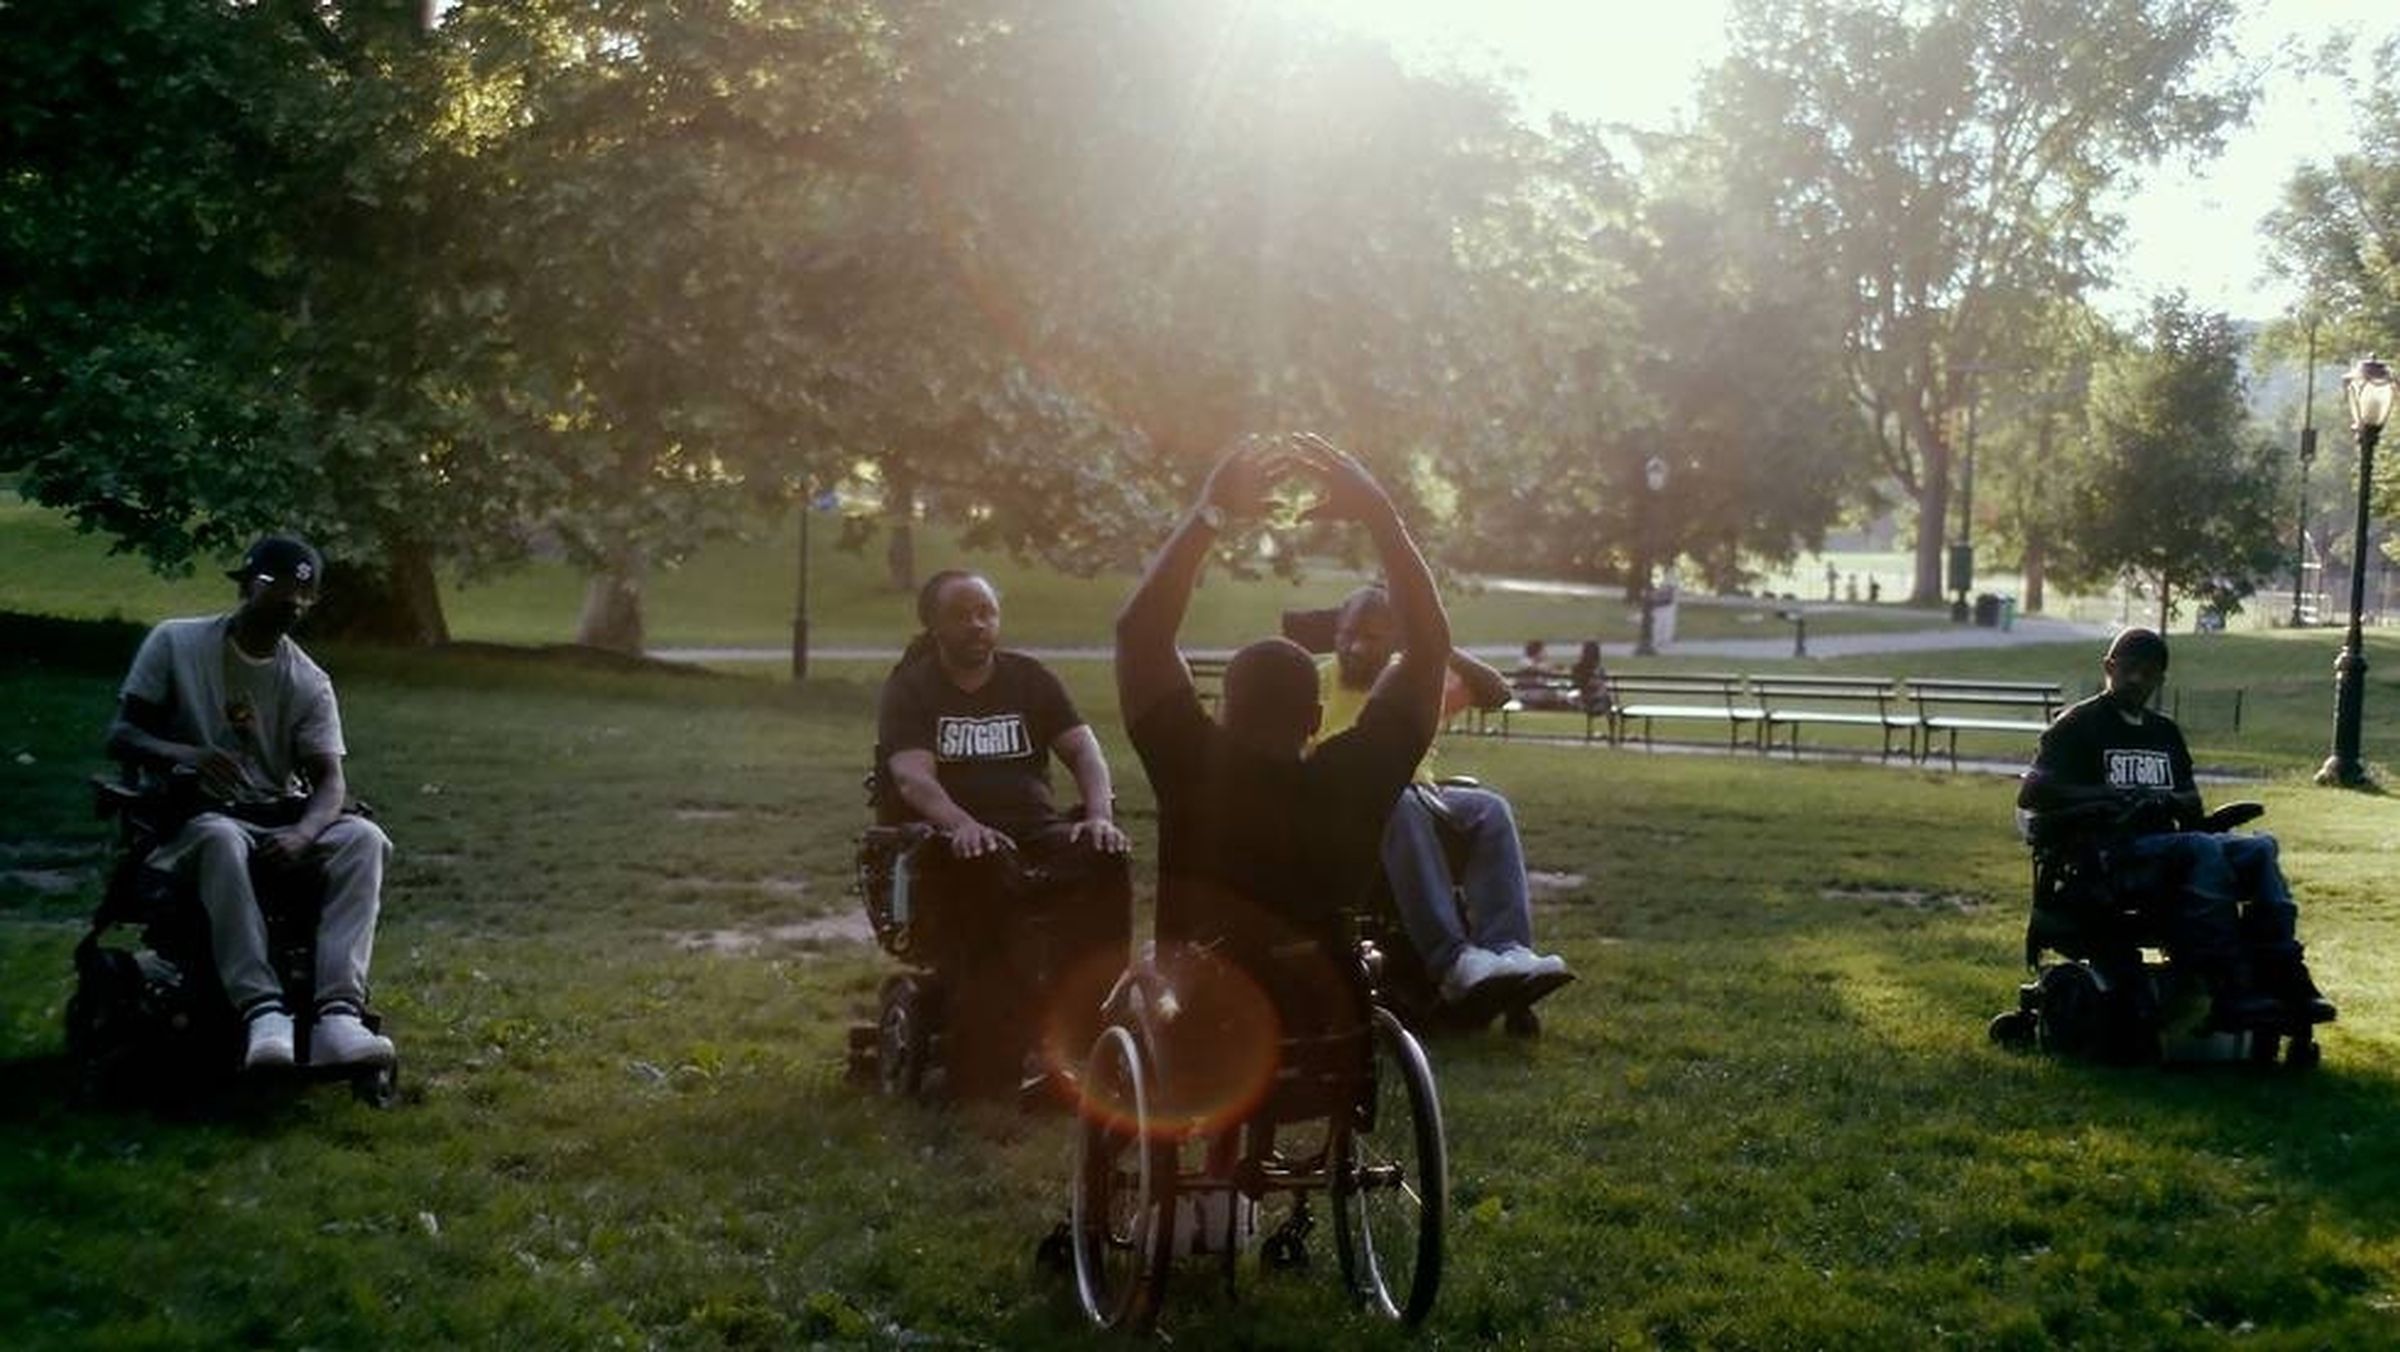 A still from Quad Gods of Prentice Hall, Richard Jacobs, Alejandro Courtney, Blake Hunt exercising in Central Park